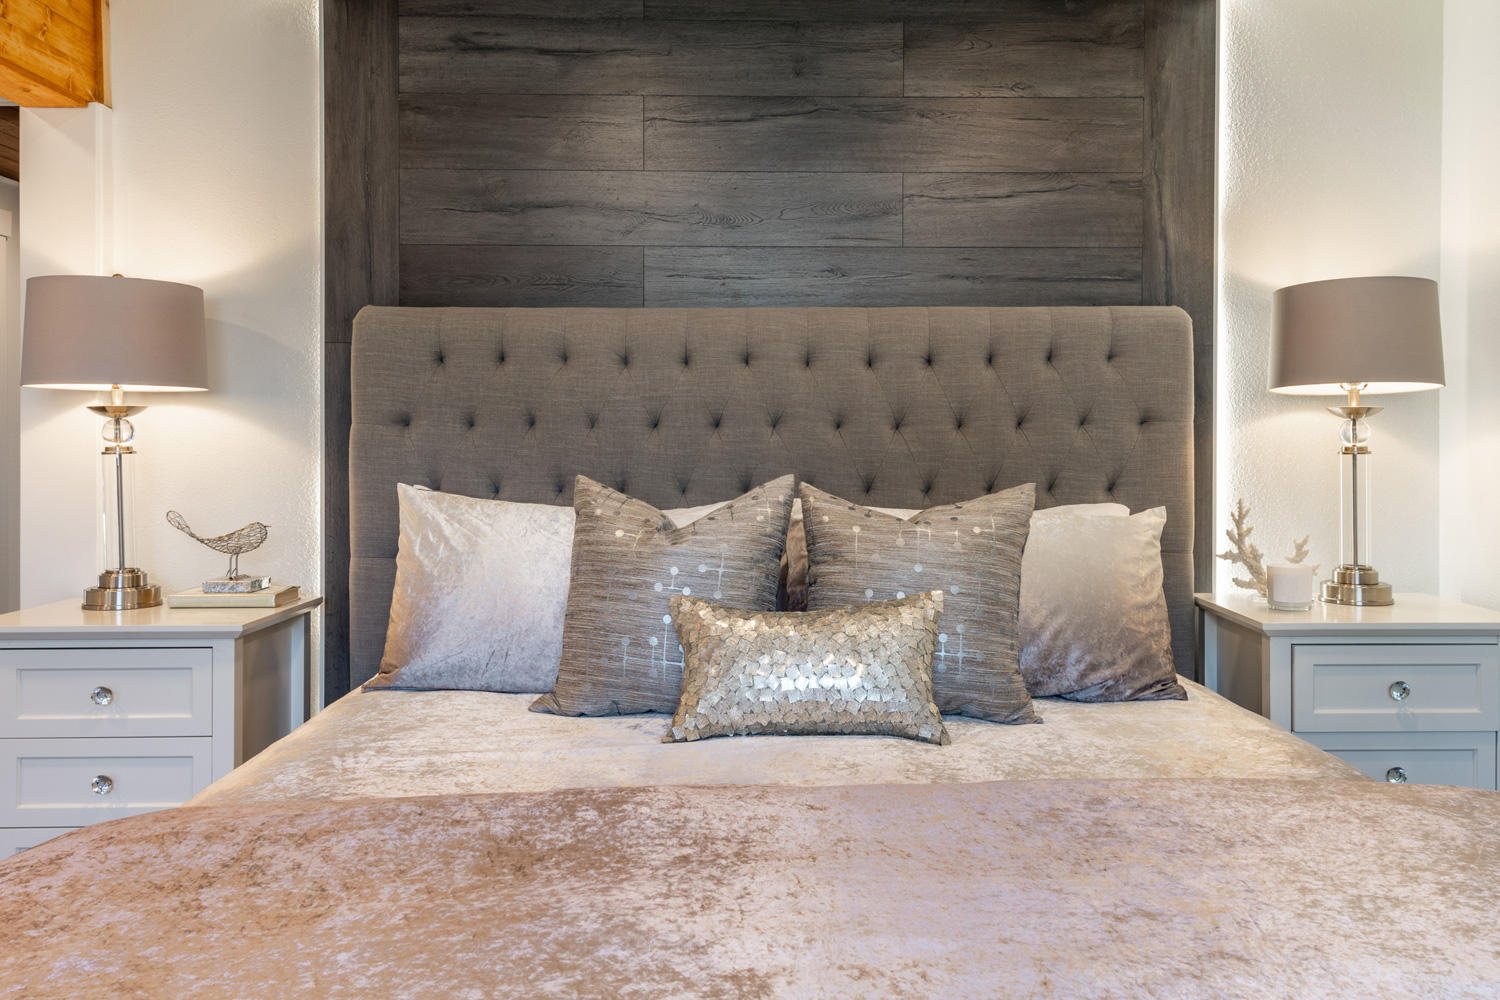 Elegant bedroom in greys soft pastels staged upholstered headboard soft pillows and wooden feature wall